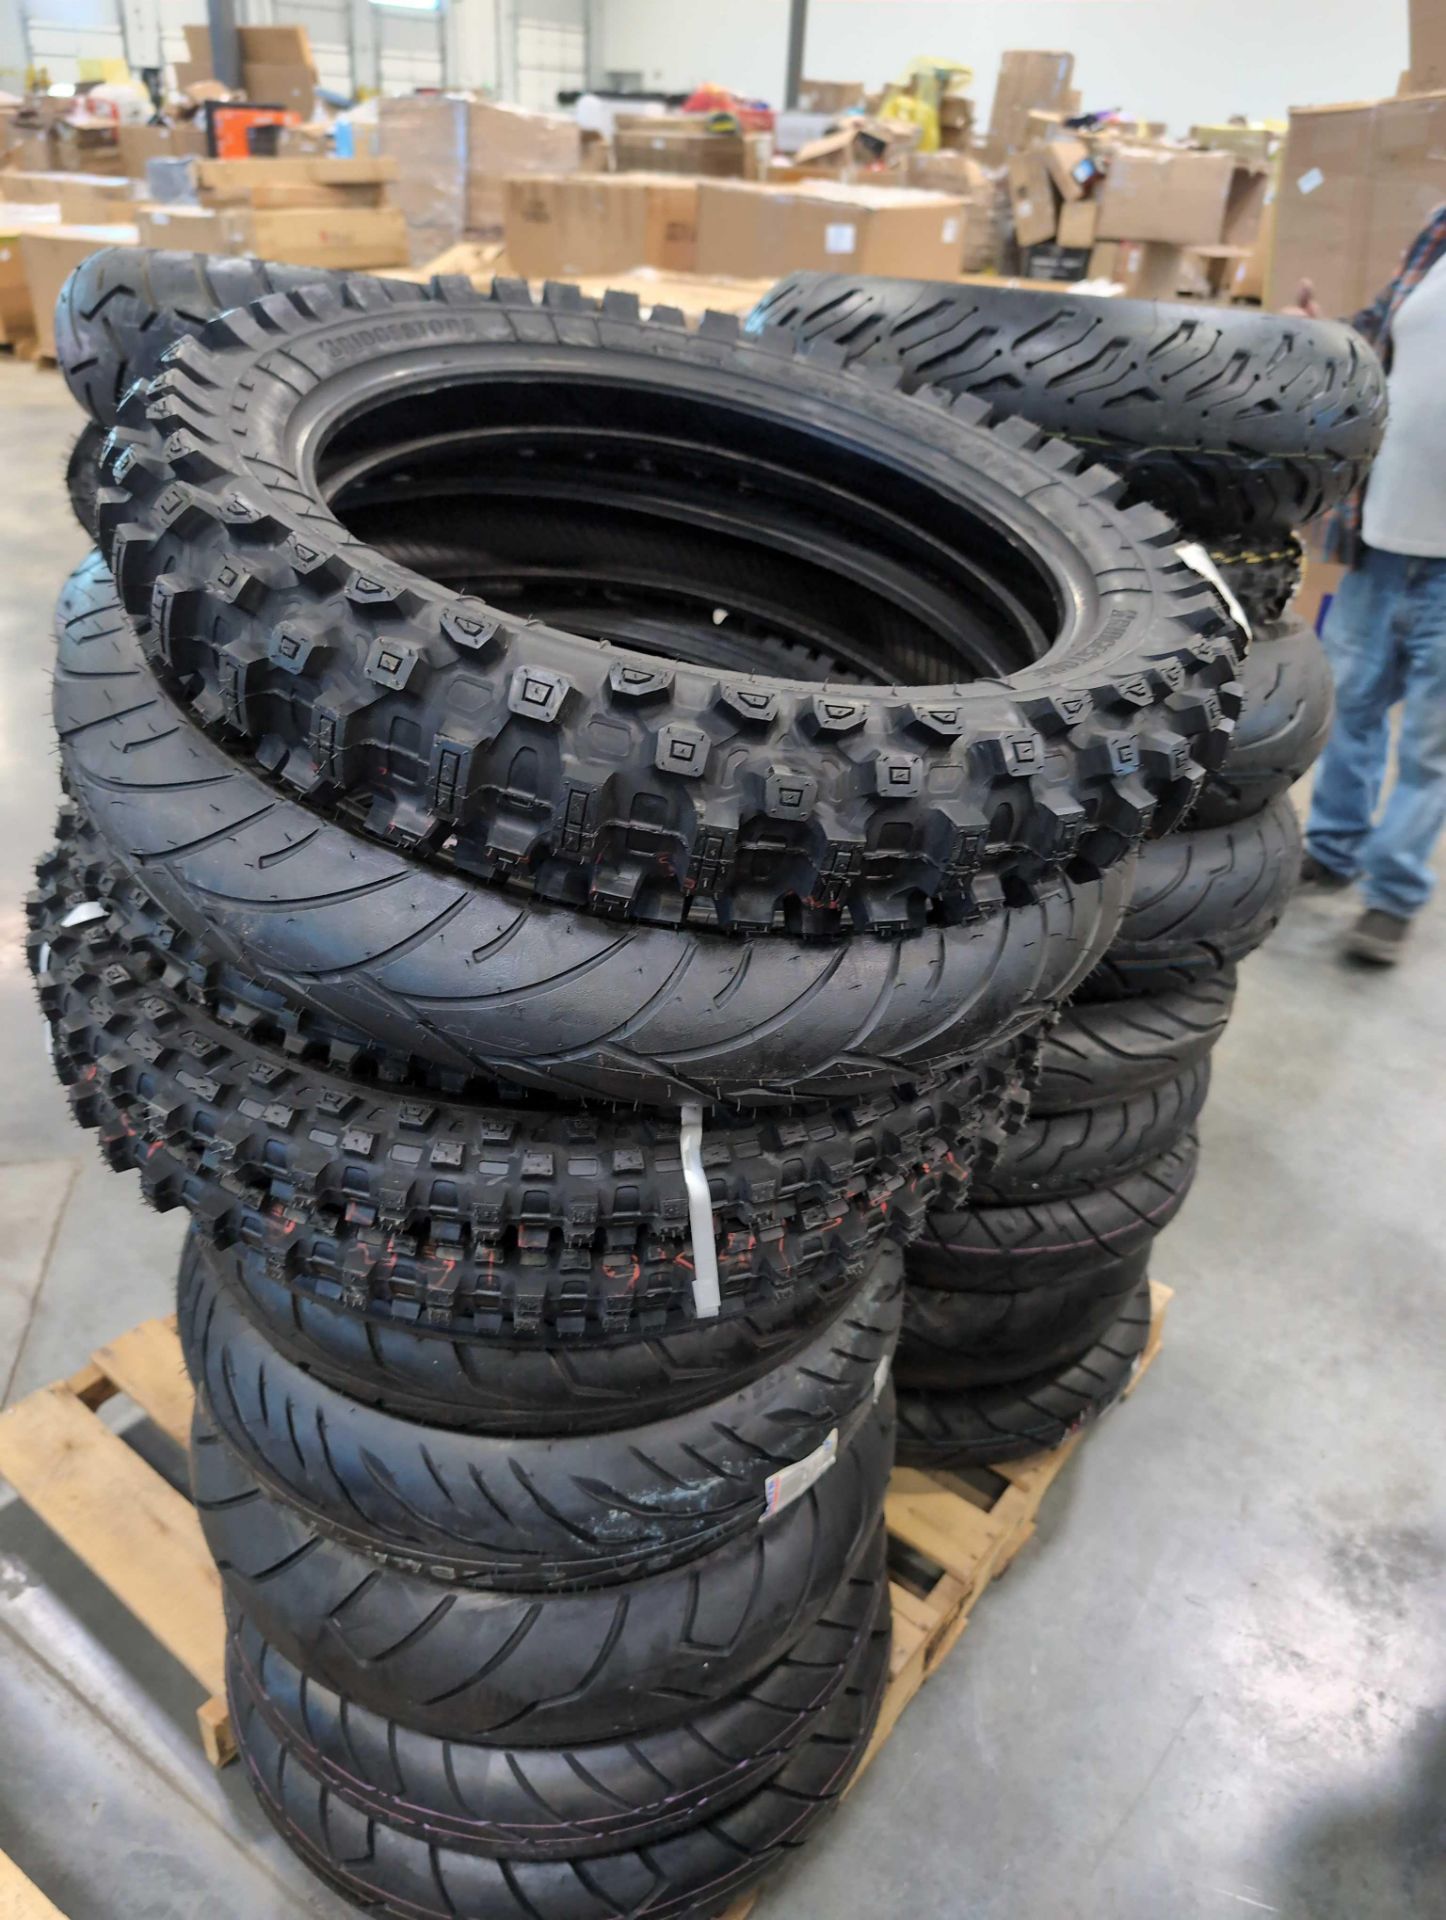 pallet of Dunlop elite in Michelin motorcycle tires - Image 8 of 8